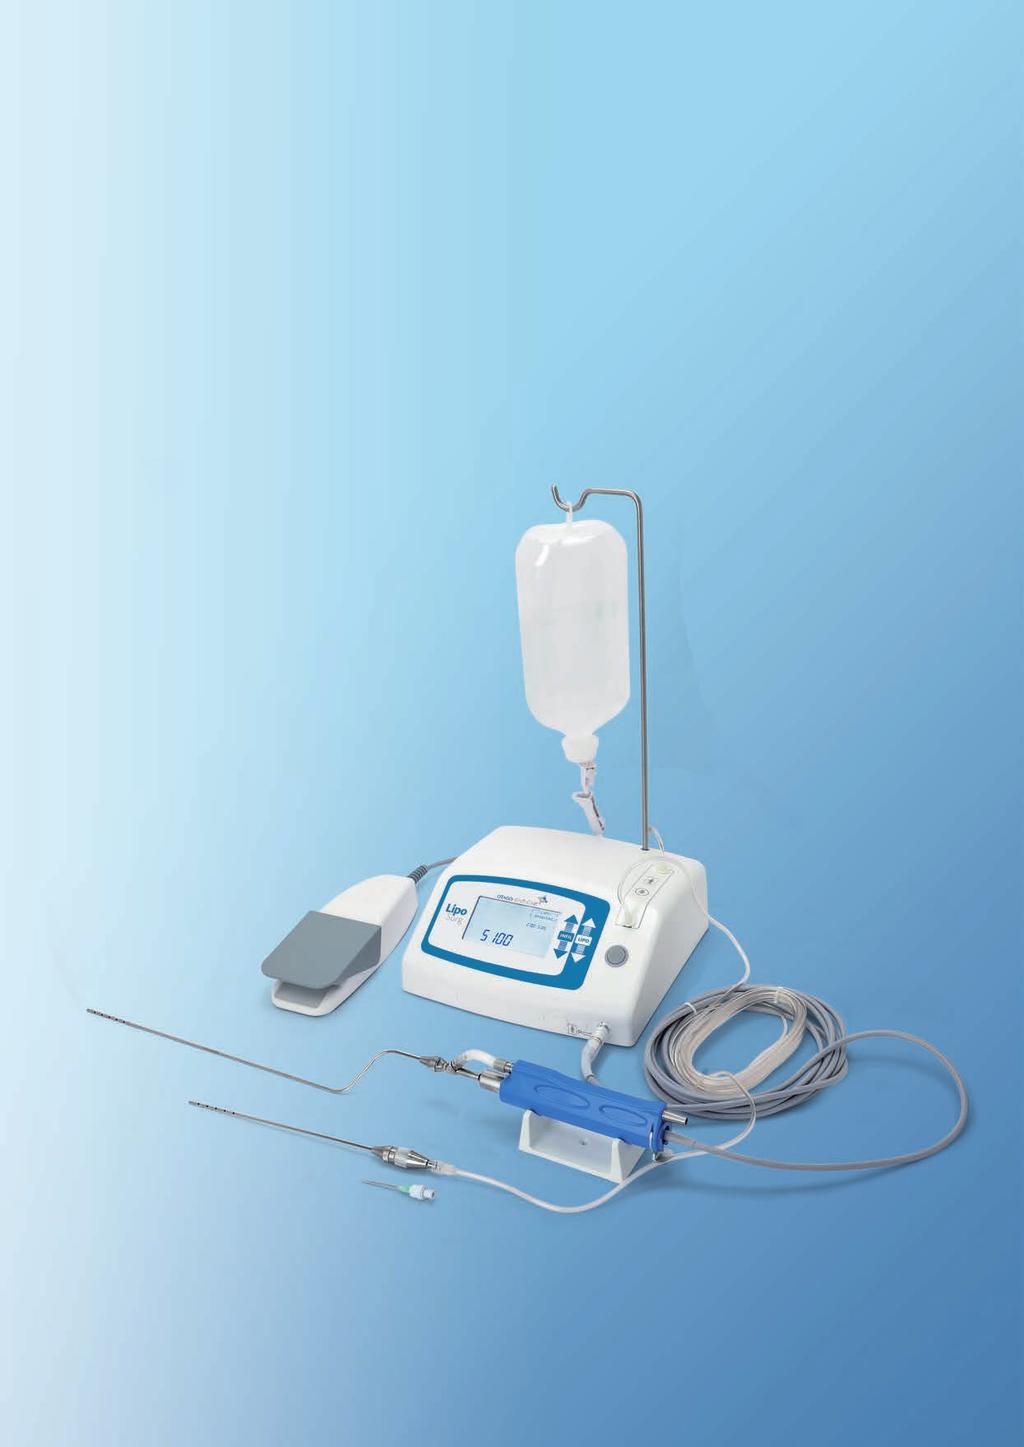 OTAGO LIPOSURG Compact, powerful system for infiltration and liposuction The Otago LipoSurg is